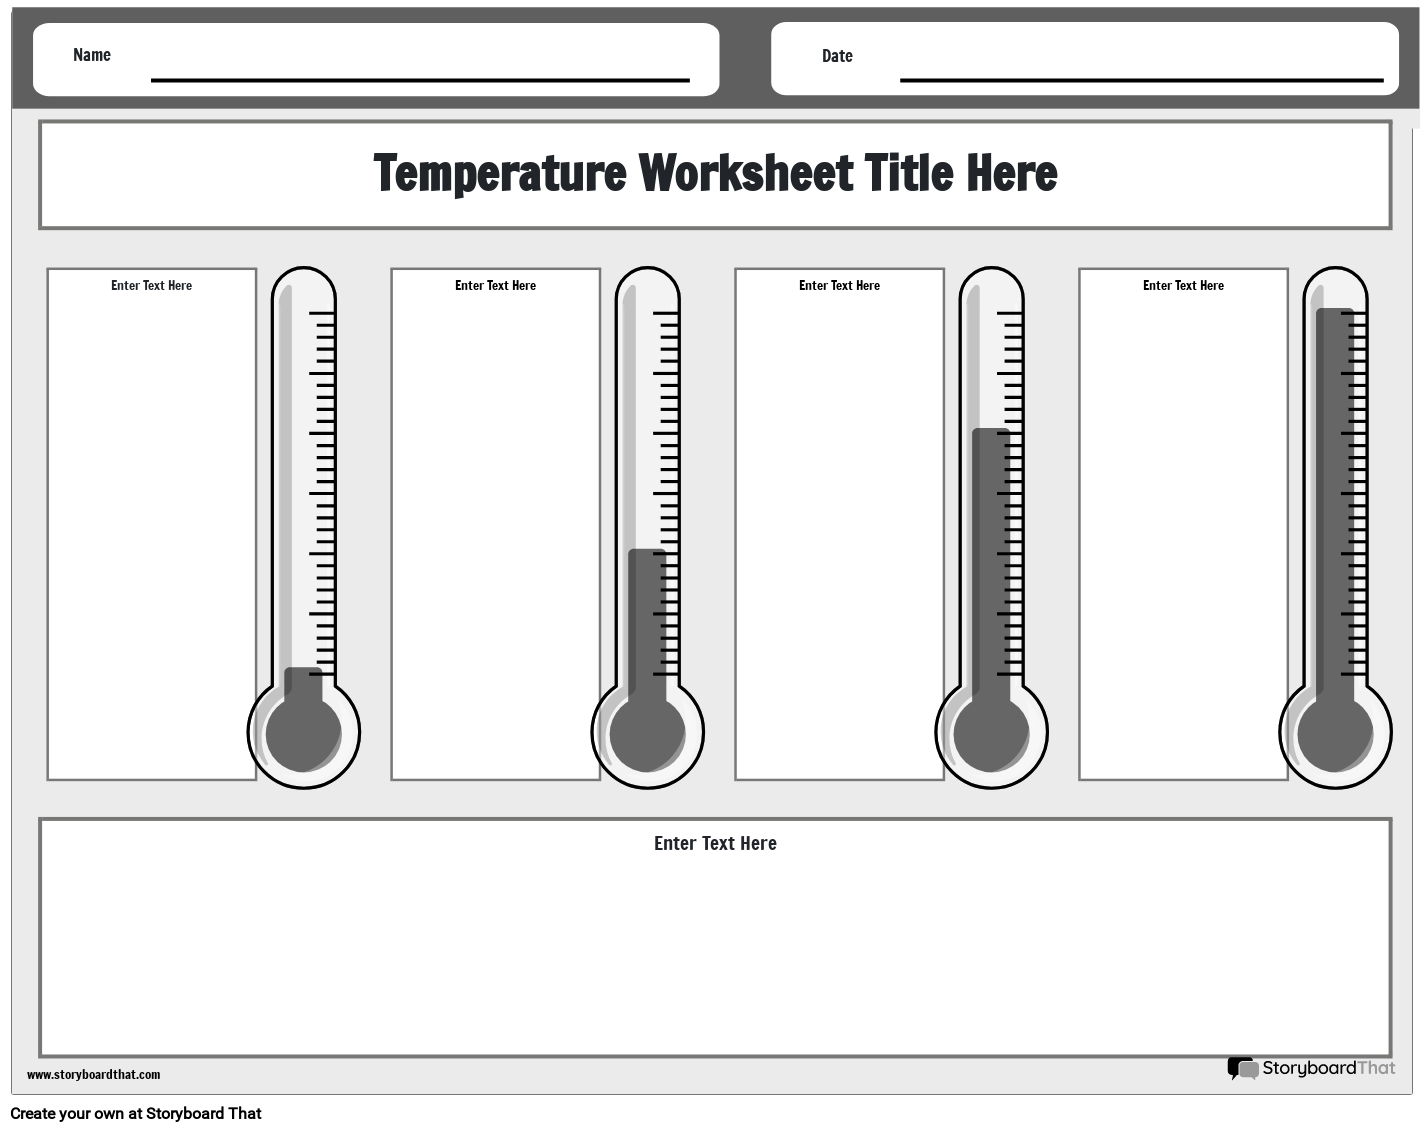 thermometer worksheet